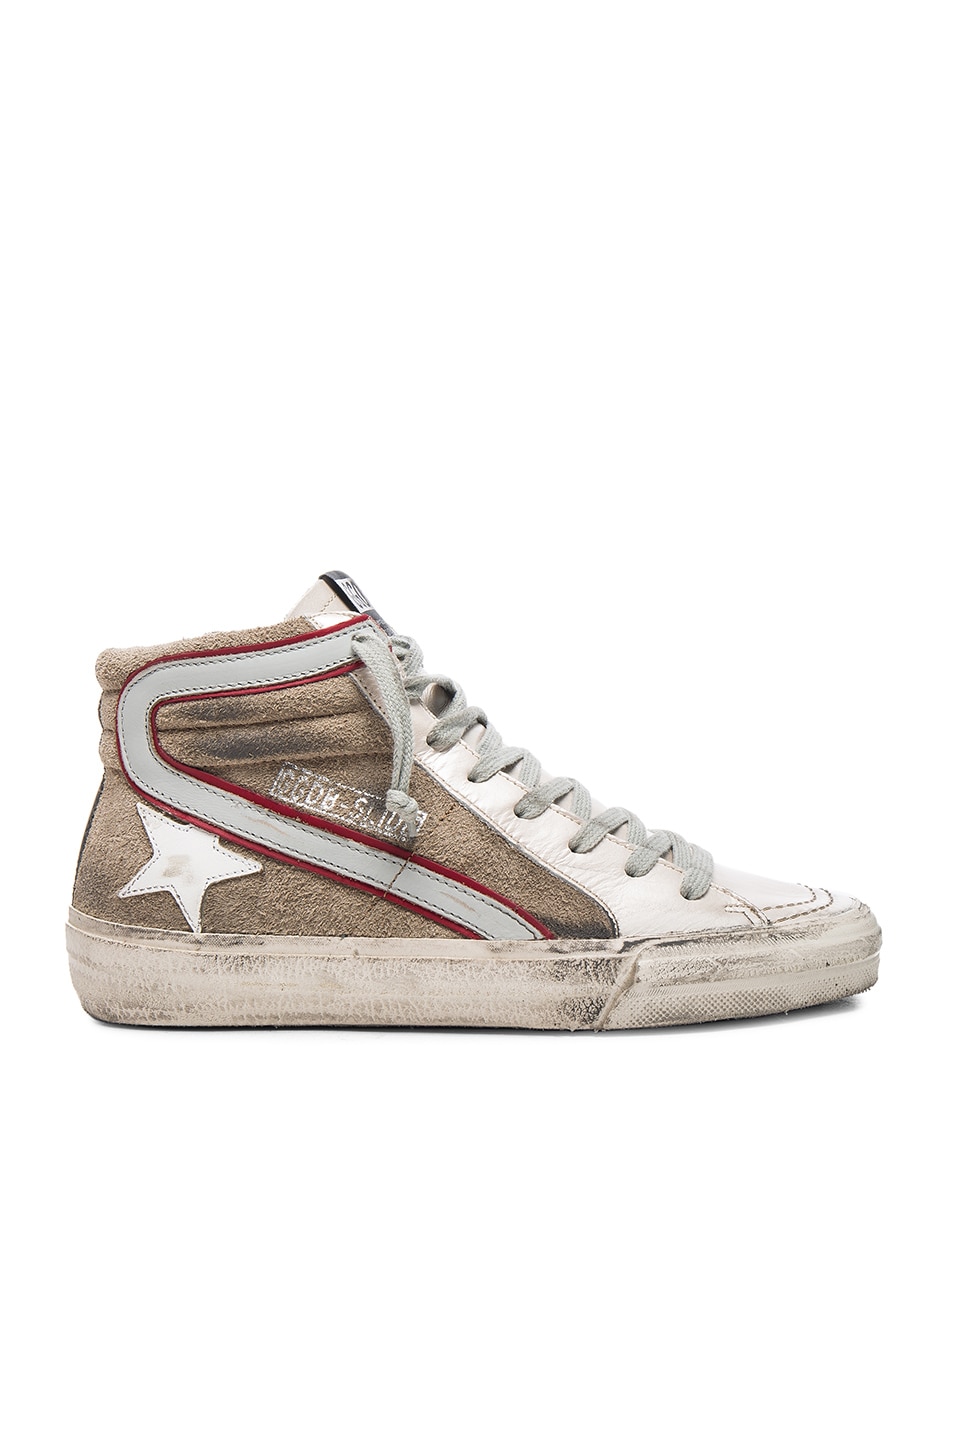 Image 1 of Golden Goose Leather Slide Sneakers in Beige & Silver